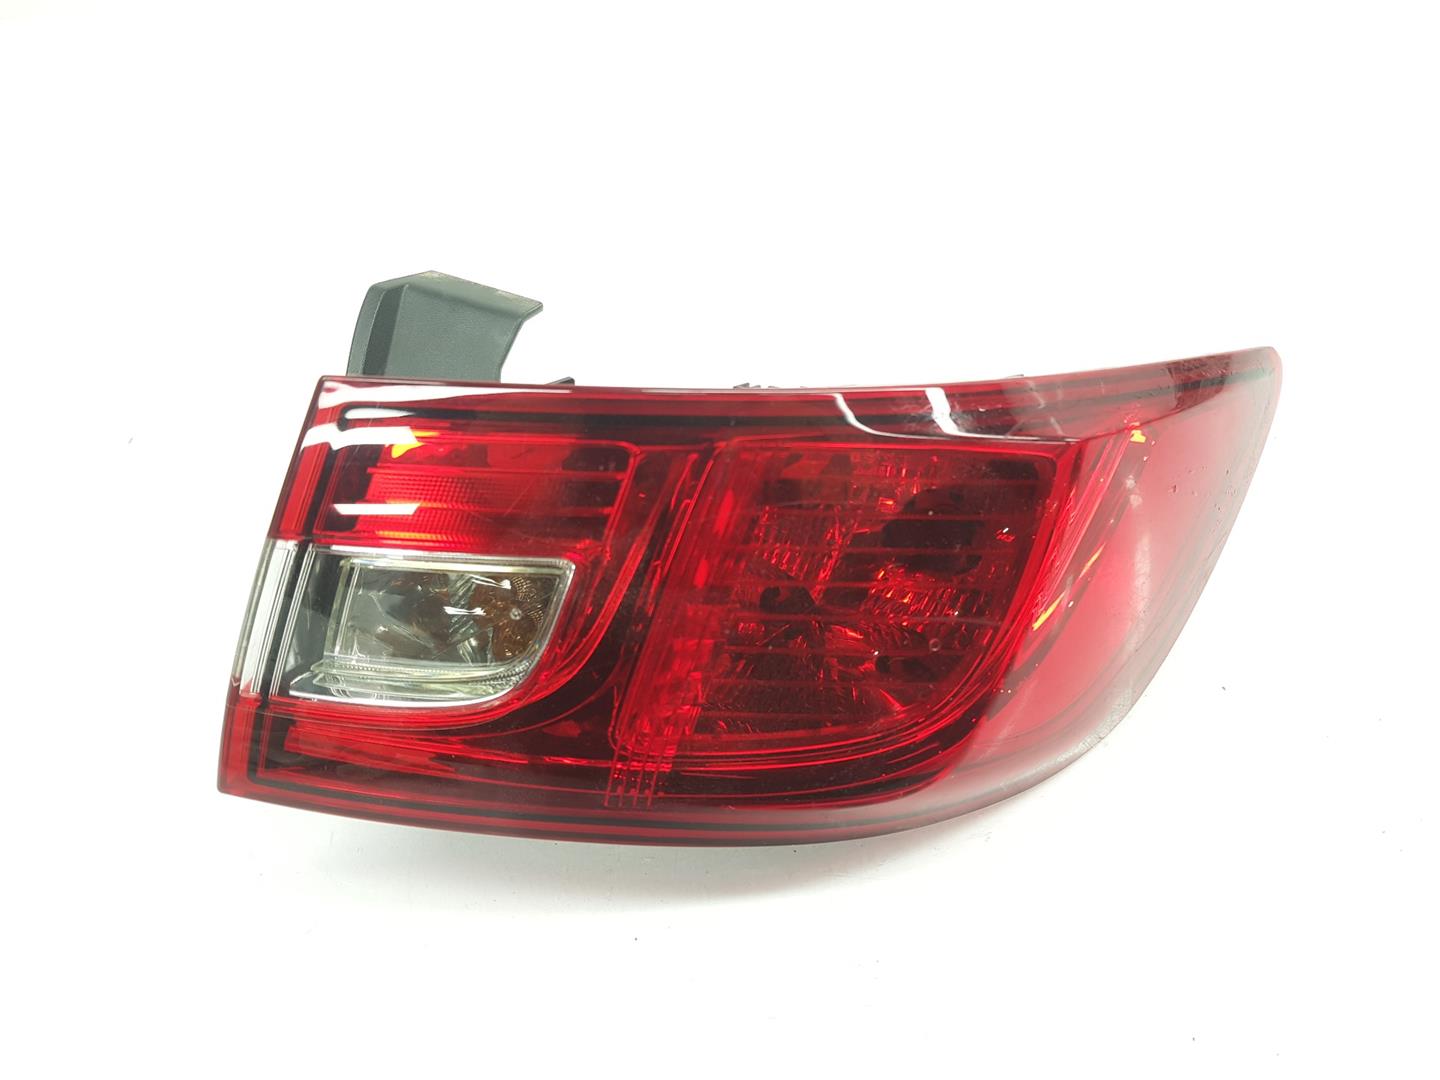 RENAULT Clio 3 generation (2005-2012) Rear Right Taillight Lamp 265509846R, 265509846R 22741019